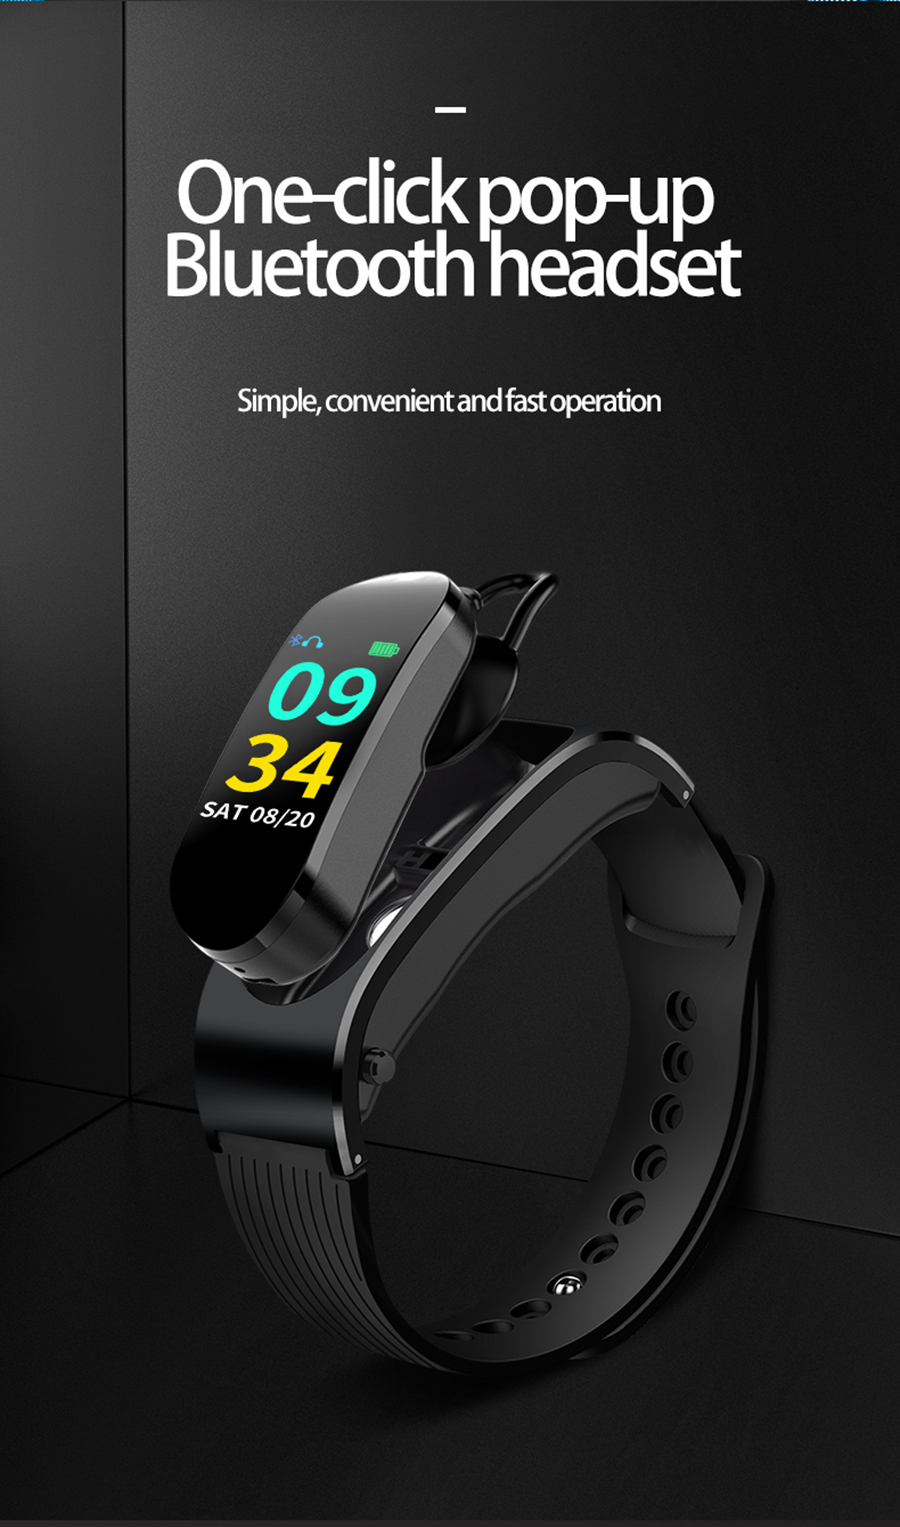 Bakeey-SL88-HD-Voice-Answering-Call-Heart-Rate-Blood-Pressure-Social-Message-Reminder-Smart-Watch-1569265